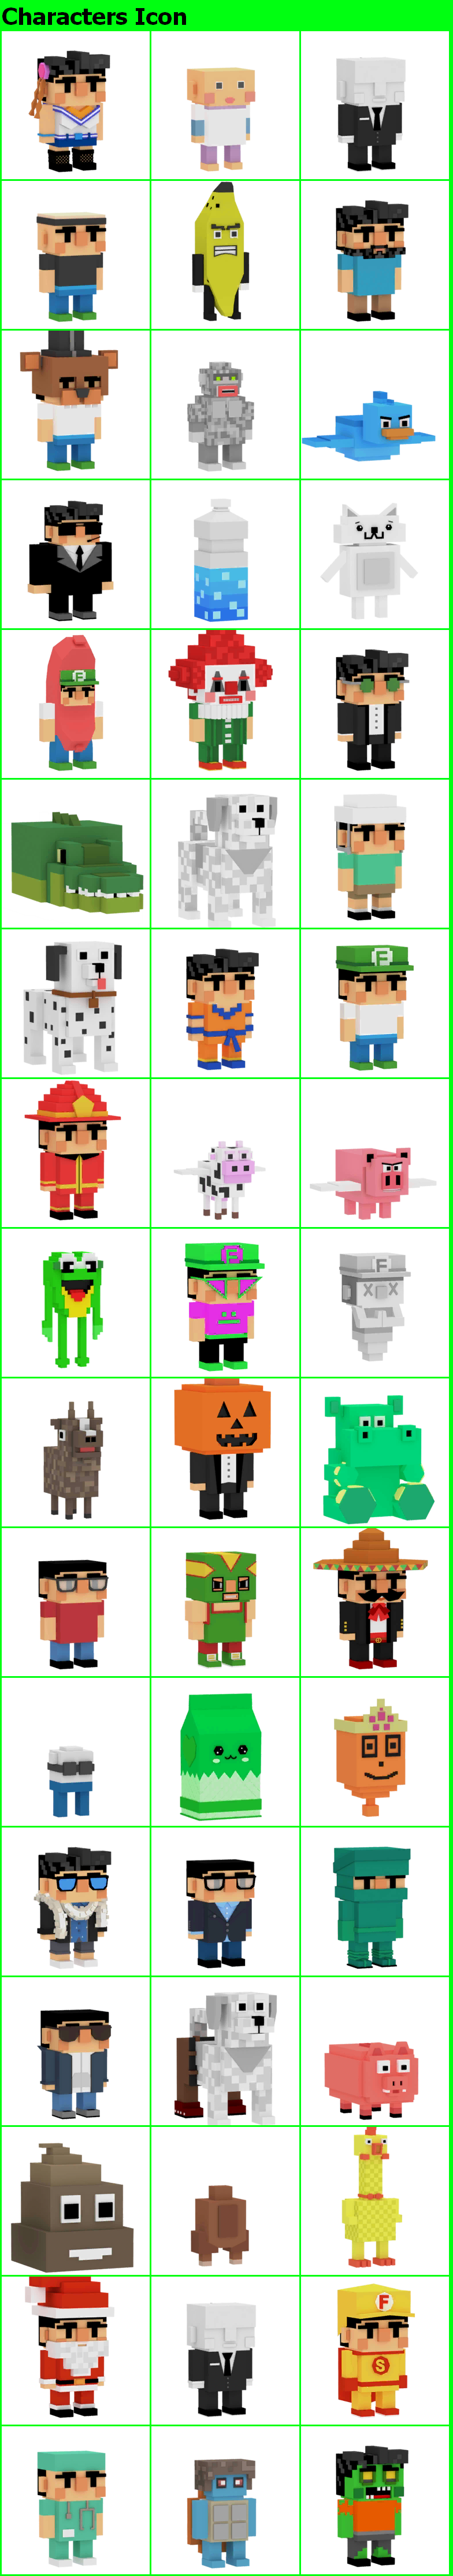 Fernanfloo Party - Character Icons